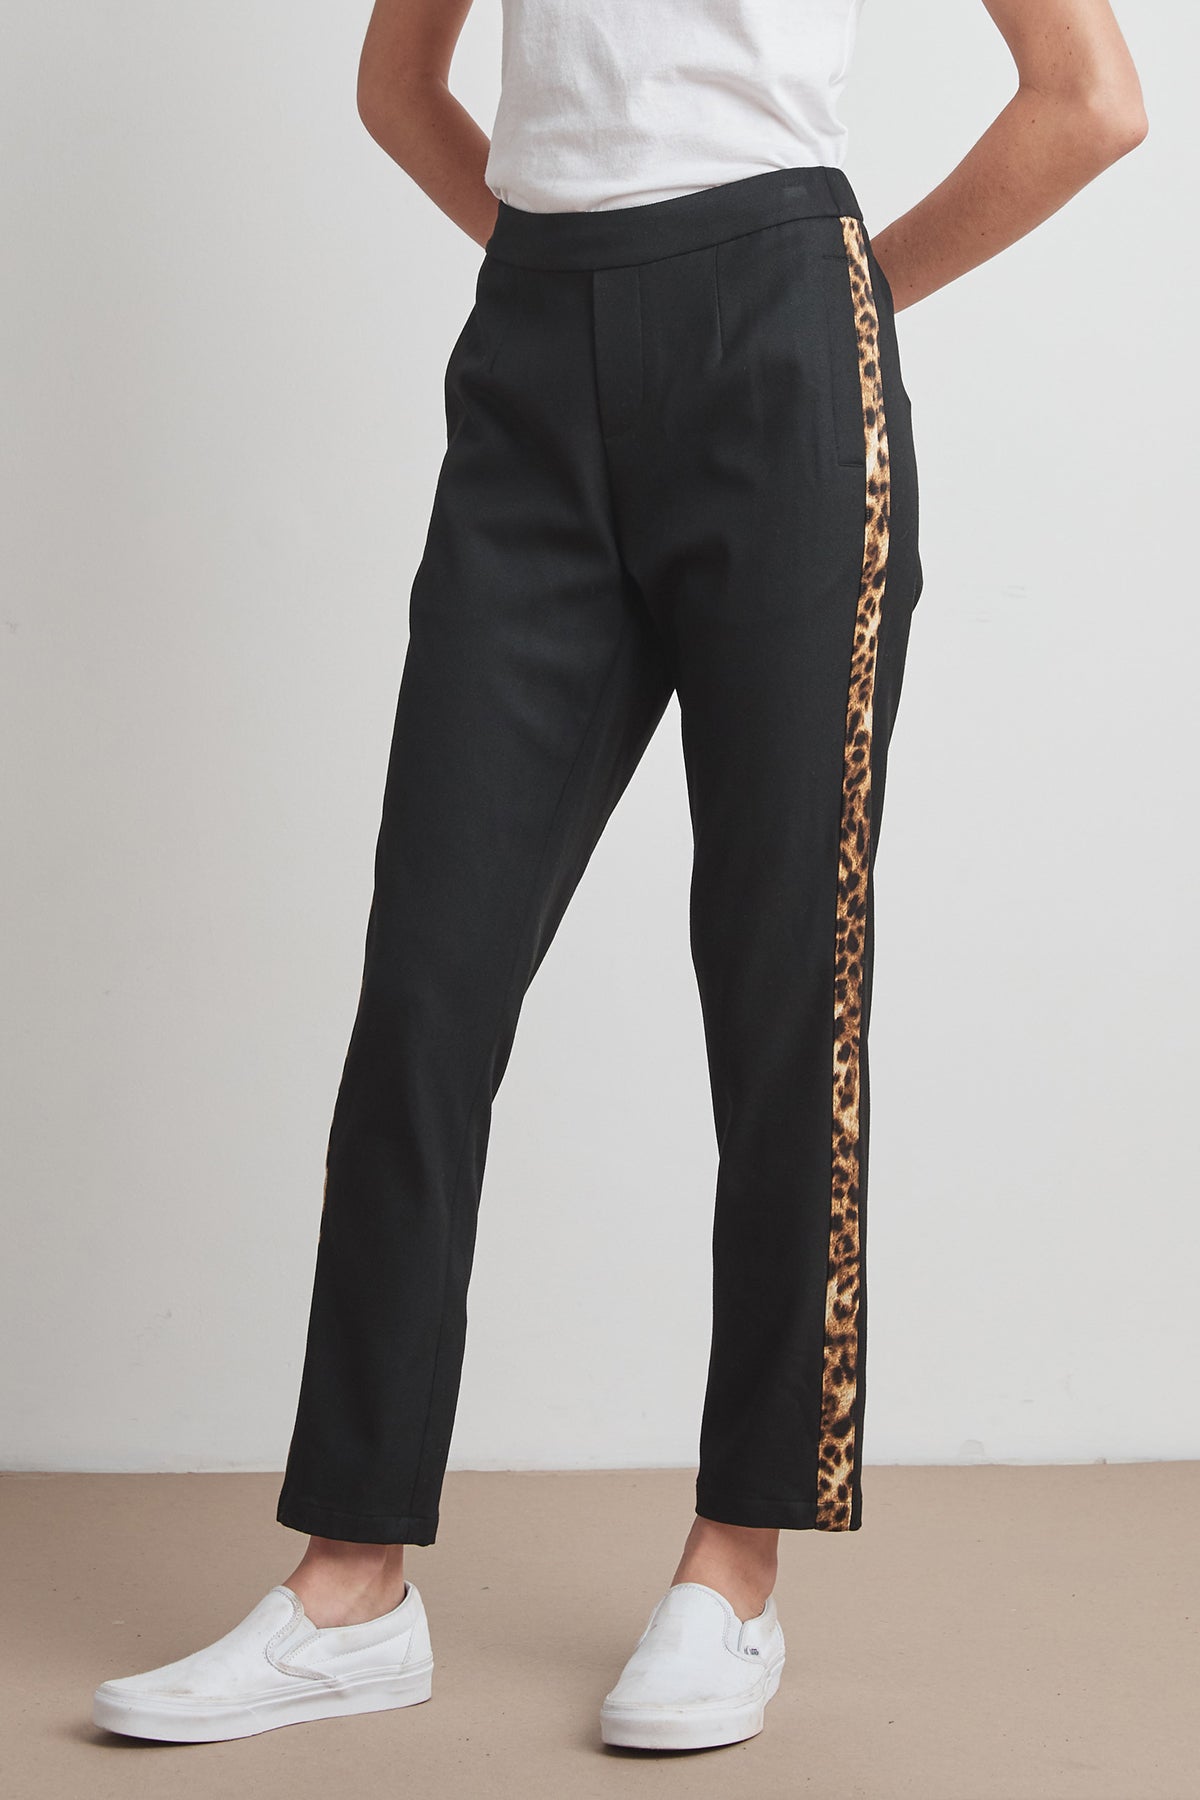 RUTHIE TROUSERS IN BLACK